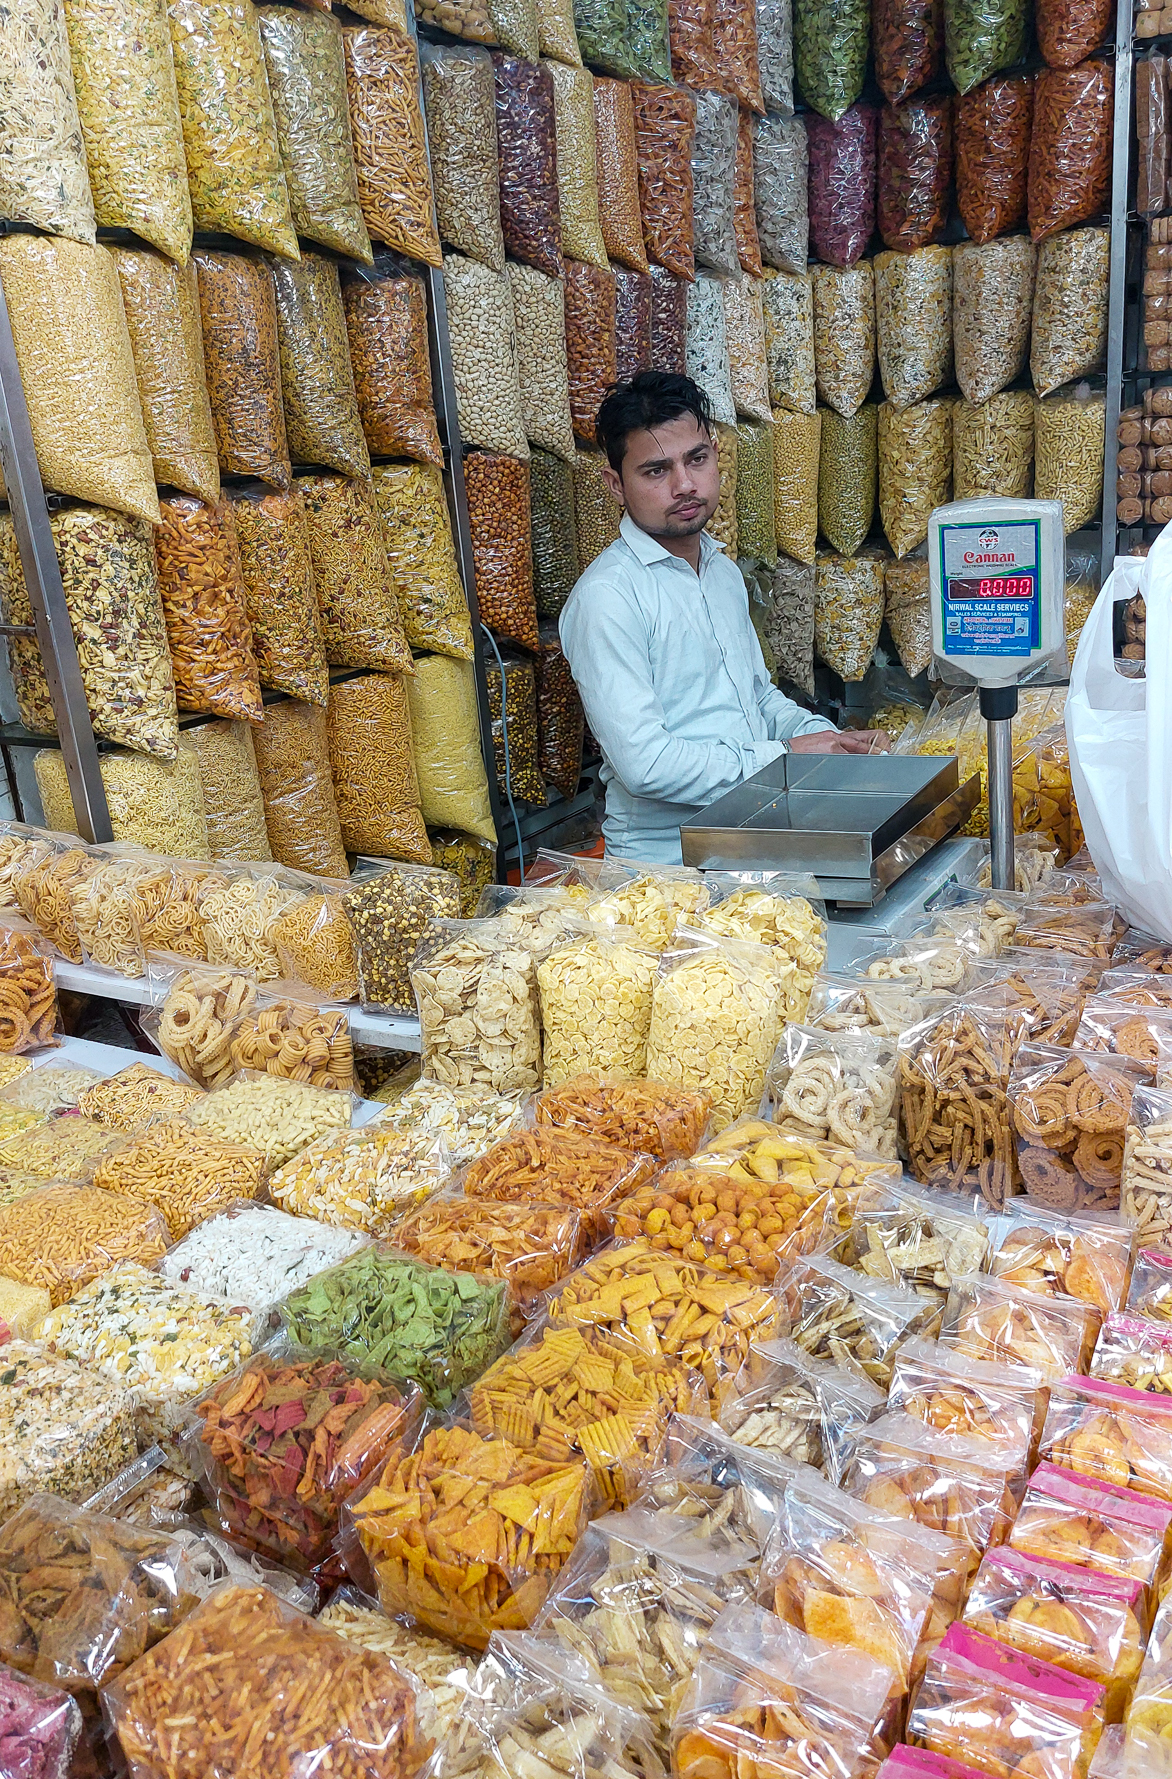 <span  class="uc_style_uc_tiles_grid_image_elementor_uc_items_attribute_title" style="color:#ffffff;">shop for Indian nibbles</span>